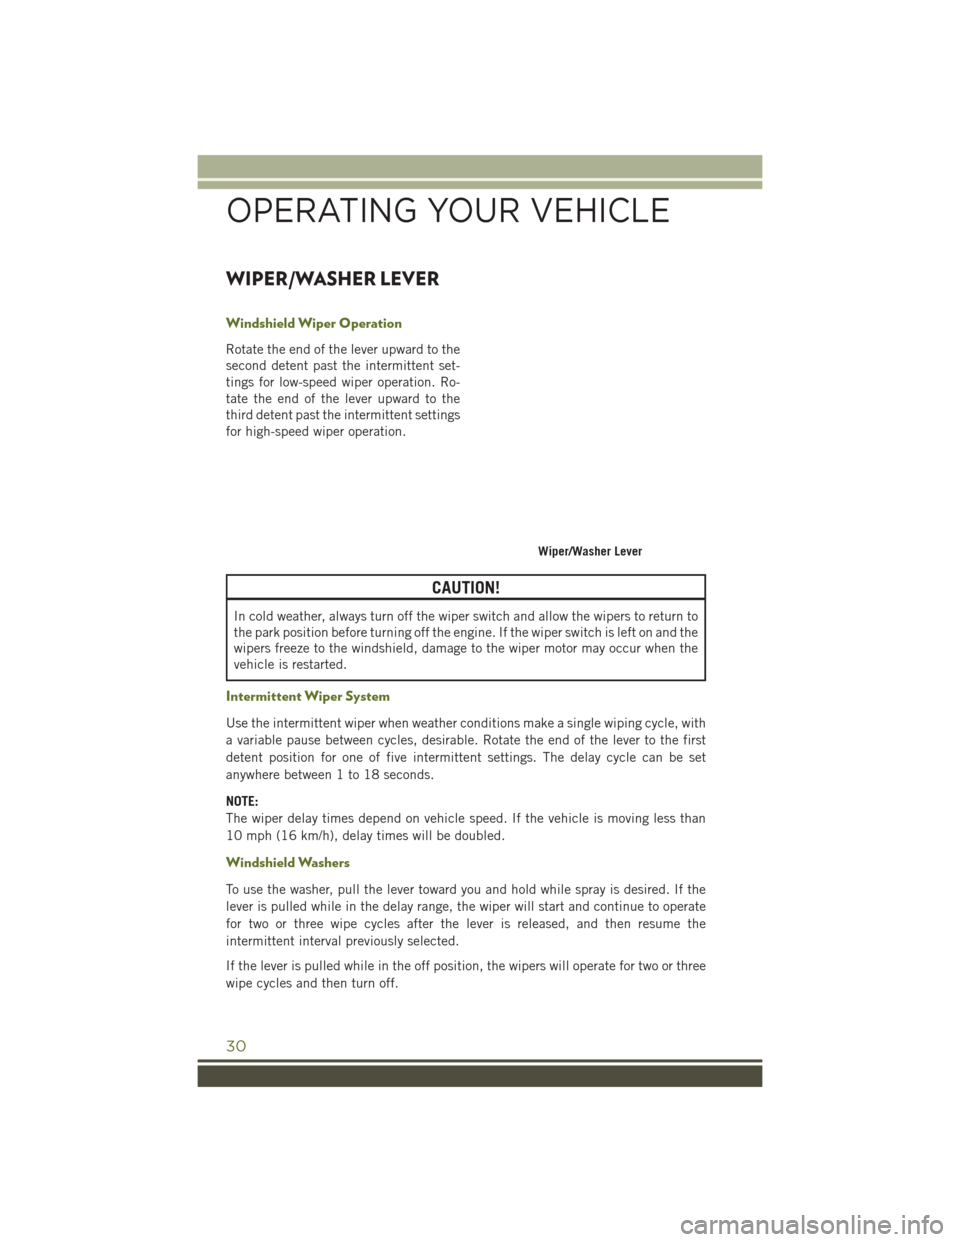 JEEP WRANGLER 2016 JK / 3.G Owners Guide WIPER/WASHER LEVER
Windshield Wiper Operation
Rotate the end of the lever upward to the
second detent past the intermittent set-
tings for low-speed wiper operation. Ro-
tate the end of the lever upwa